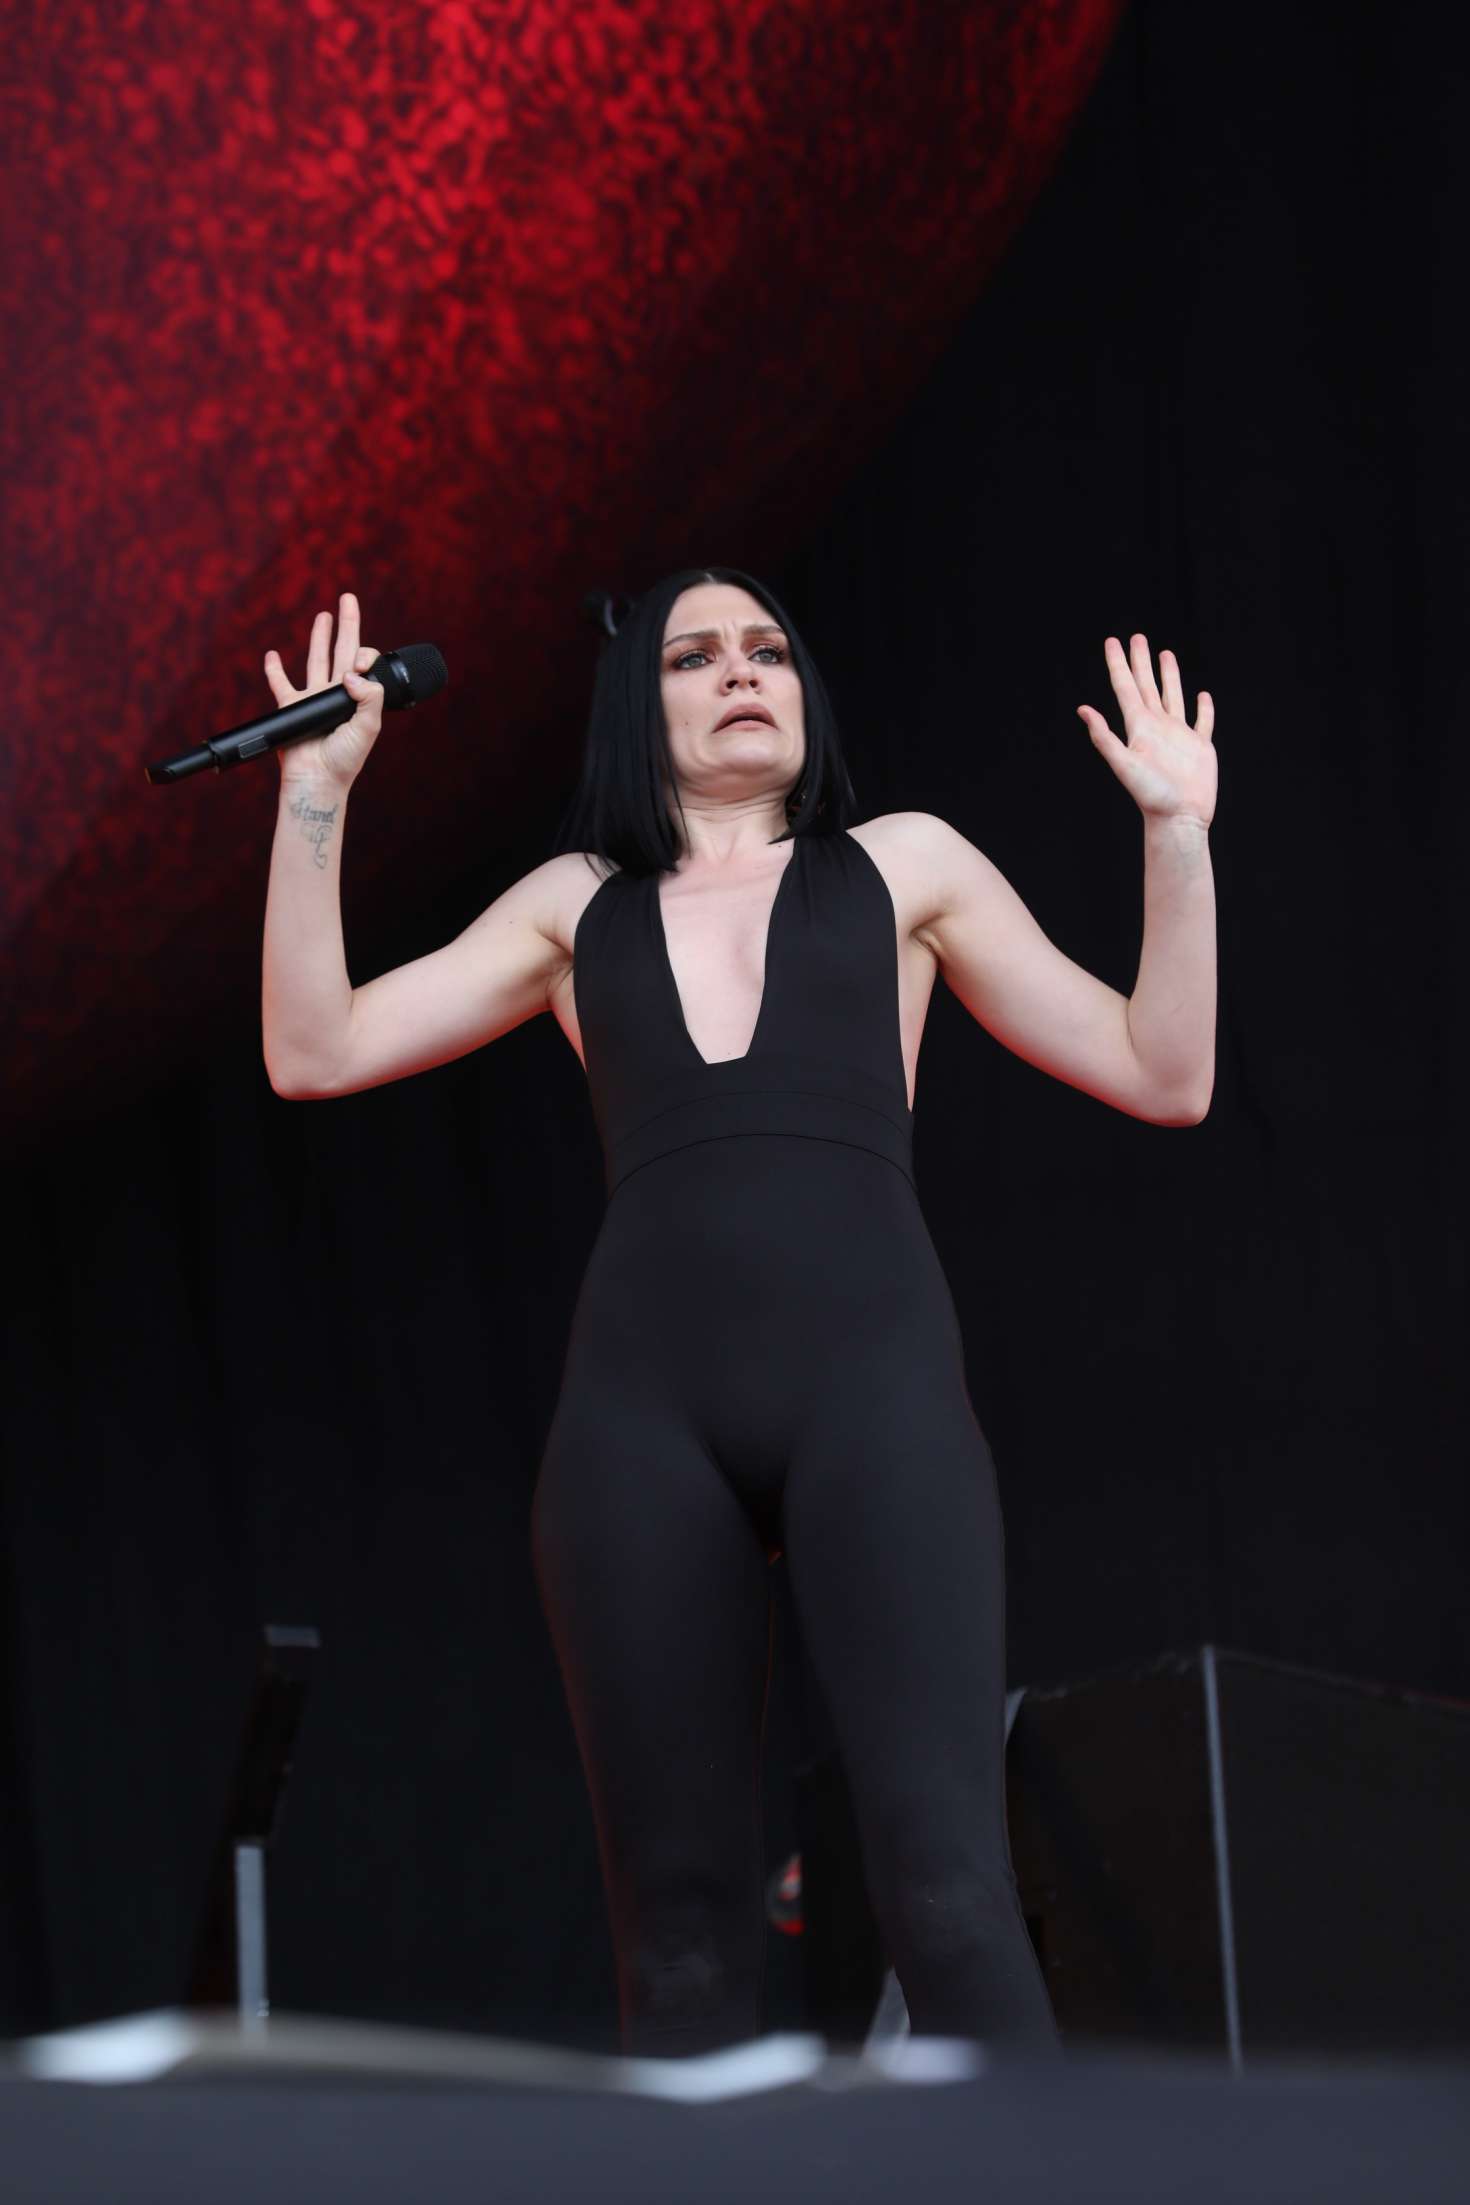 Jessie J - Performs at the Isle of Wight festival in Newport